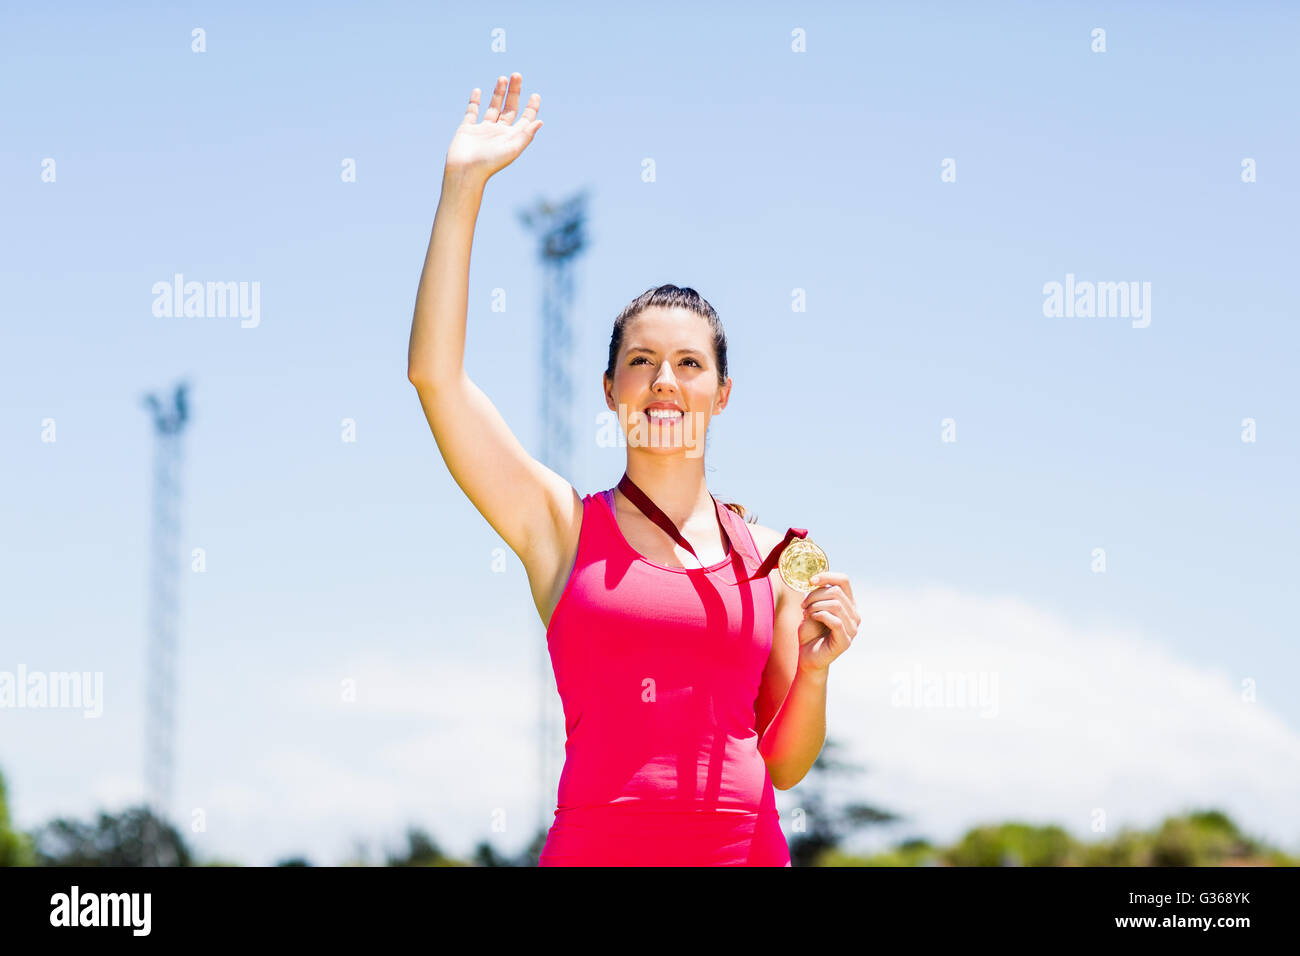 Female athlete waving her hand and showing gold medal Stock Photo